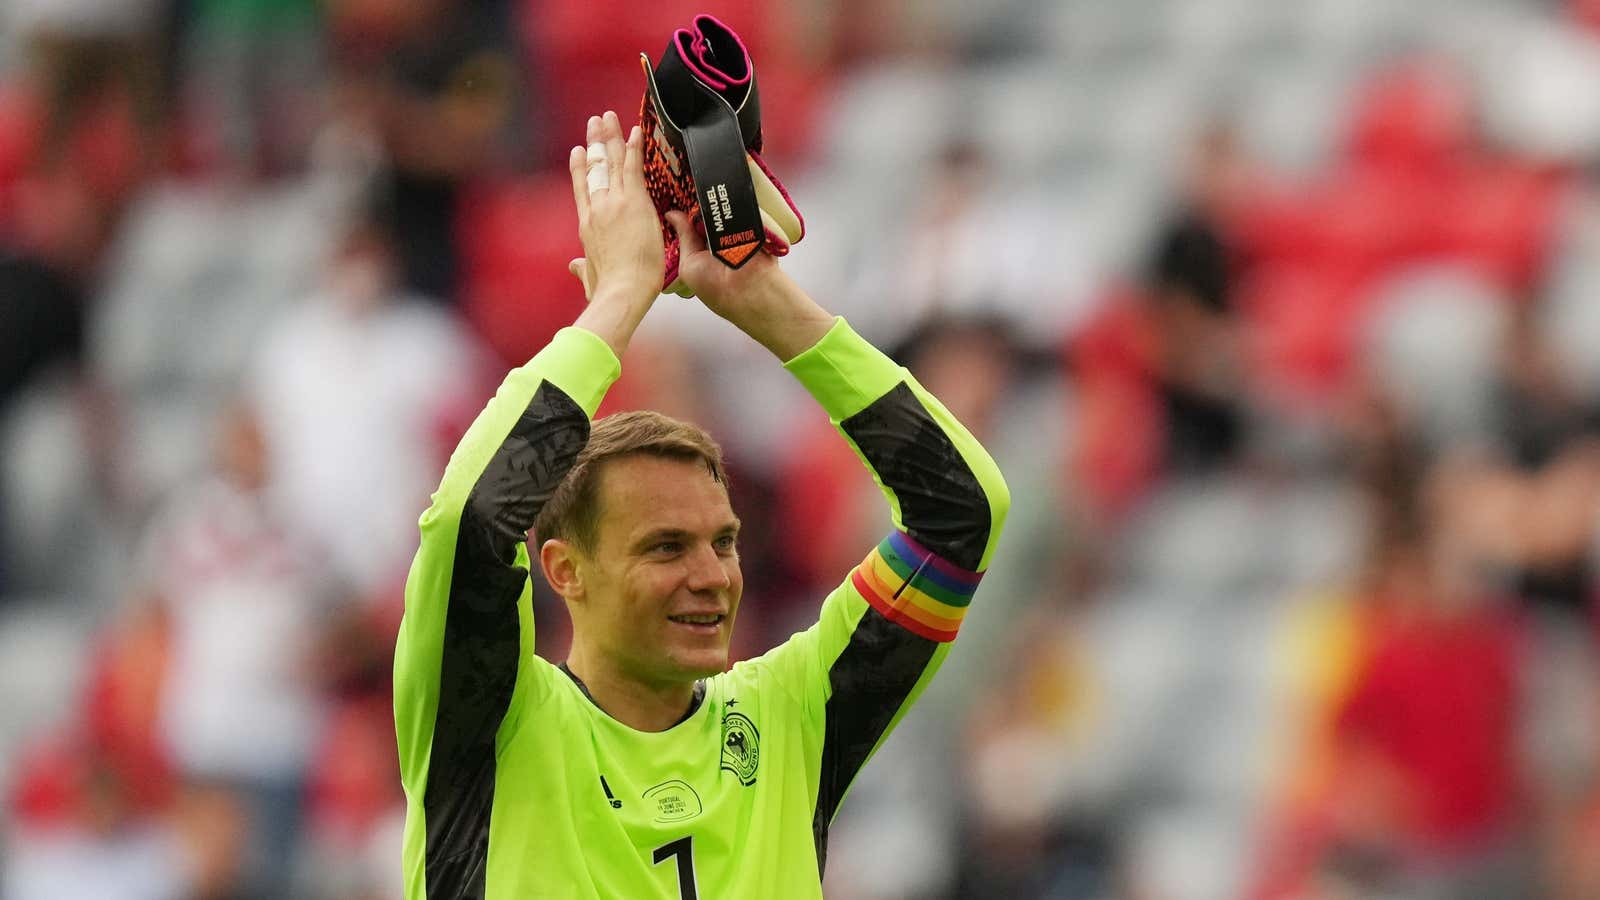 Germany’s Manuel Neuer has worn a rainbow armband in support of the LGBTQ community.